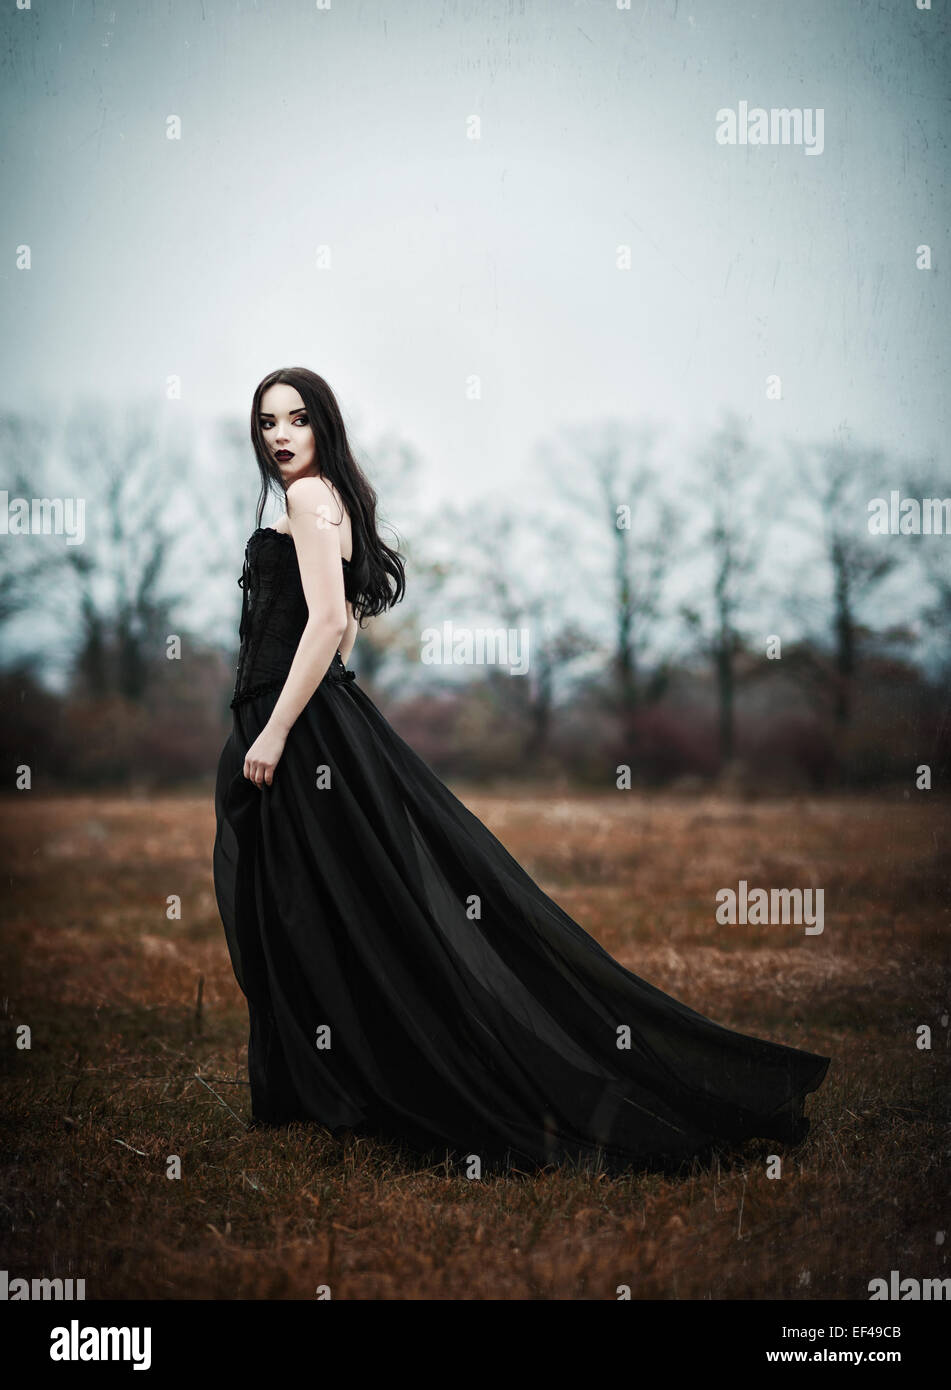 A beautiful sad goth girl stands in autumnal field. Grunge texture effect Stock Photo